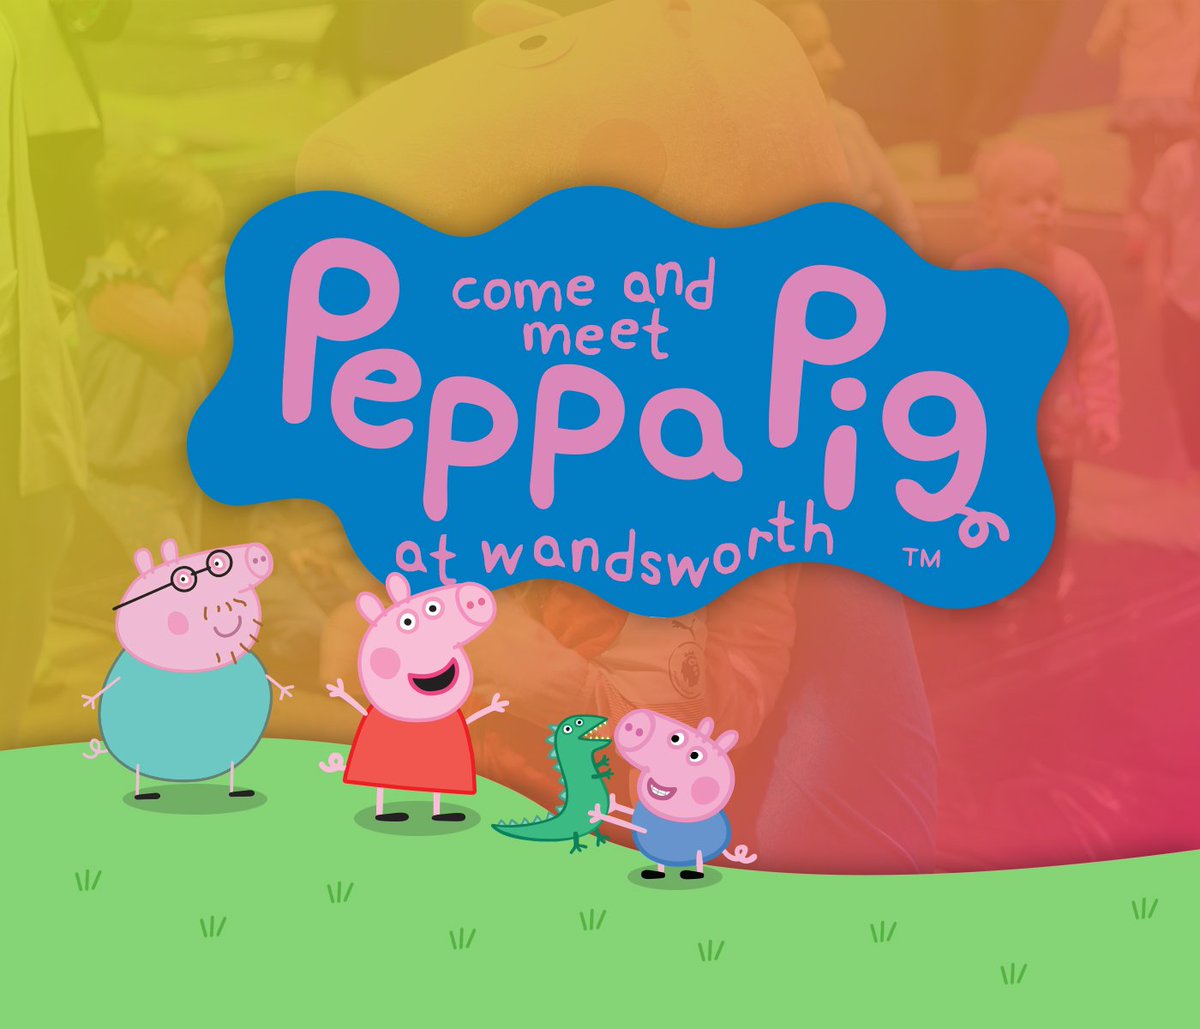 Only 1 week to go until Peppa Pig joins us for the BEST Toddler Time session EVER! 🐷 Who's excited?